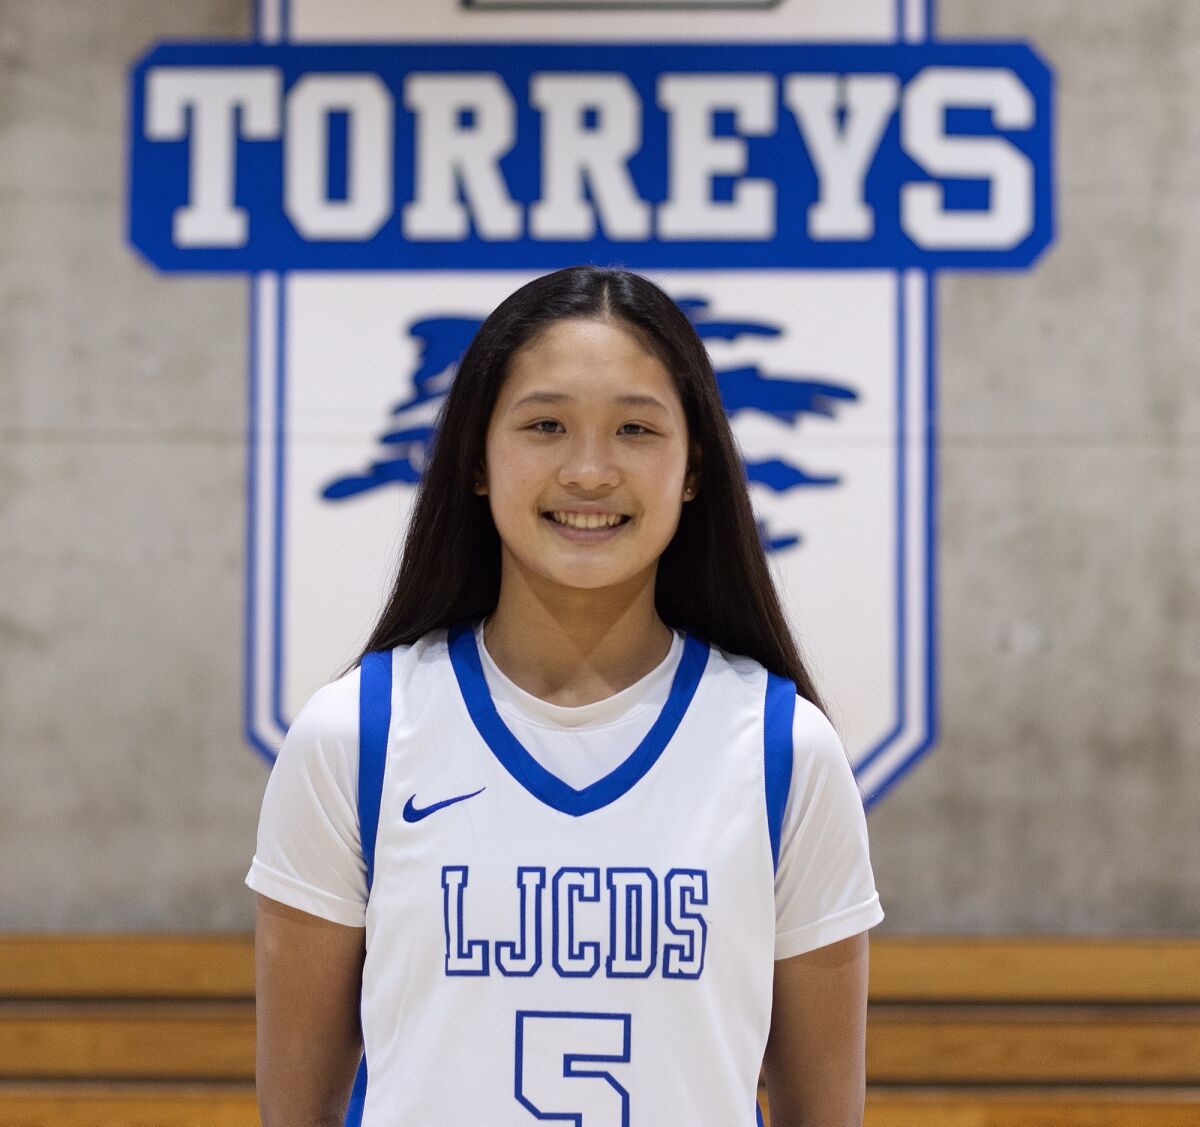 La Jolla Country Day School sophomore basketball player Sumayah Sugapong has been named to the Junior NBA Court of Leaders.